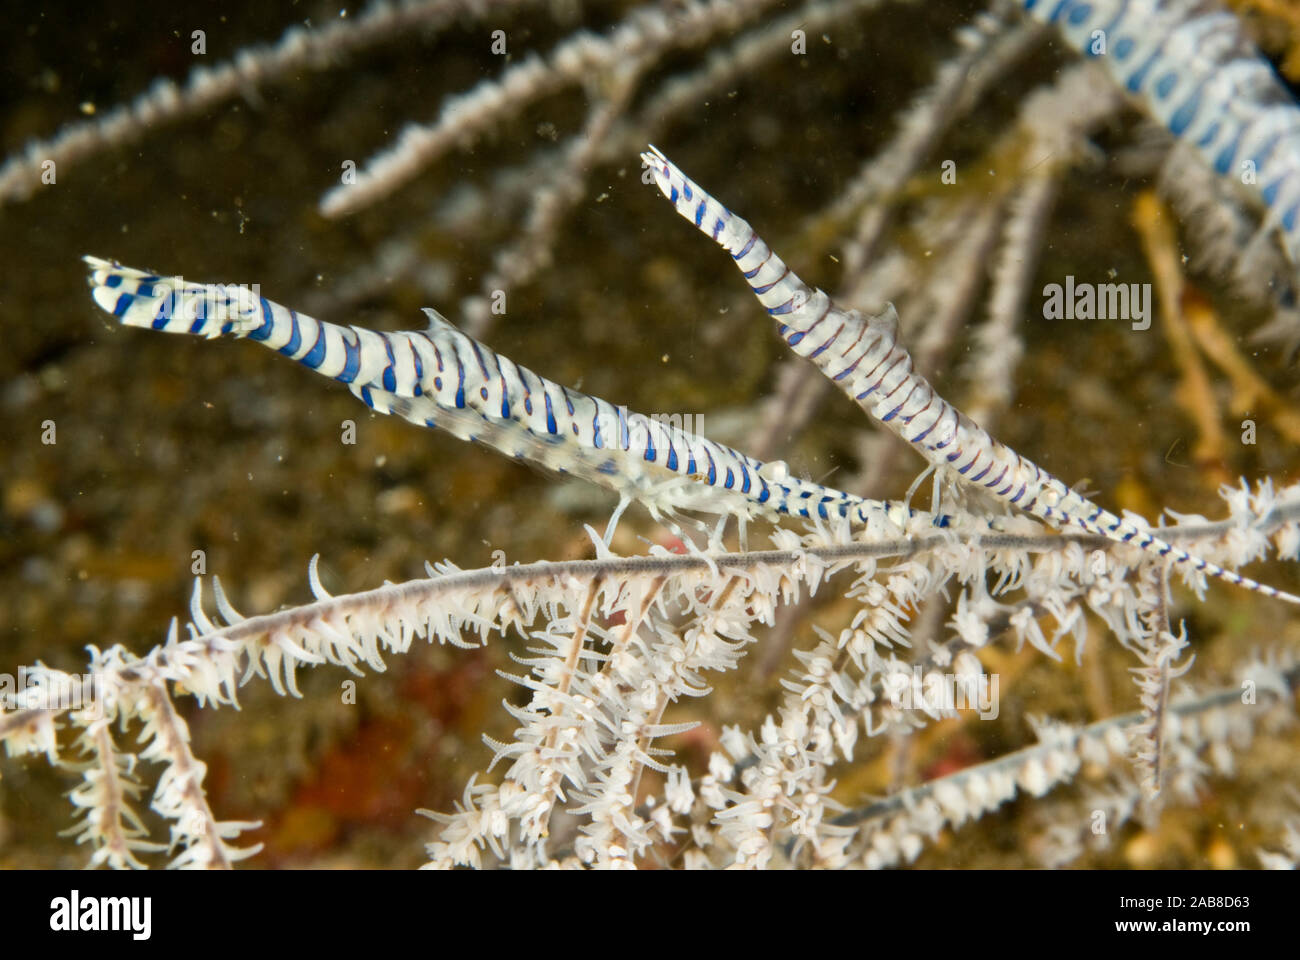 Sawblade shrimp (Tozeuma armatum), an exotic very elongate species of shrimp with rostrum that is nearly a third of the total length. Body transparent Stock Photo